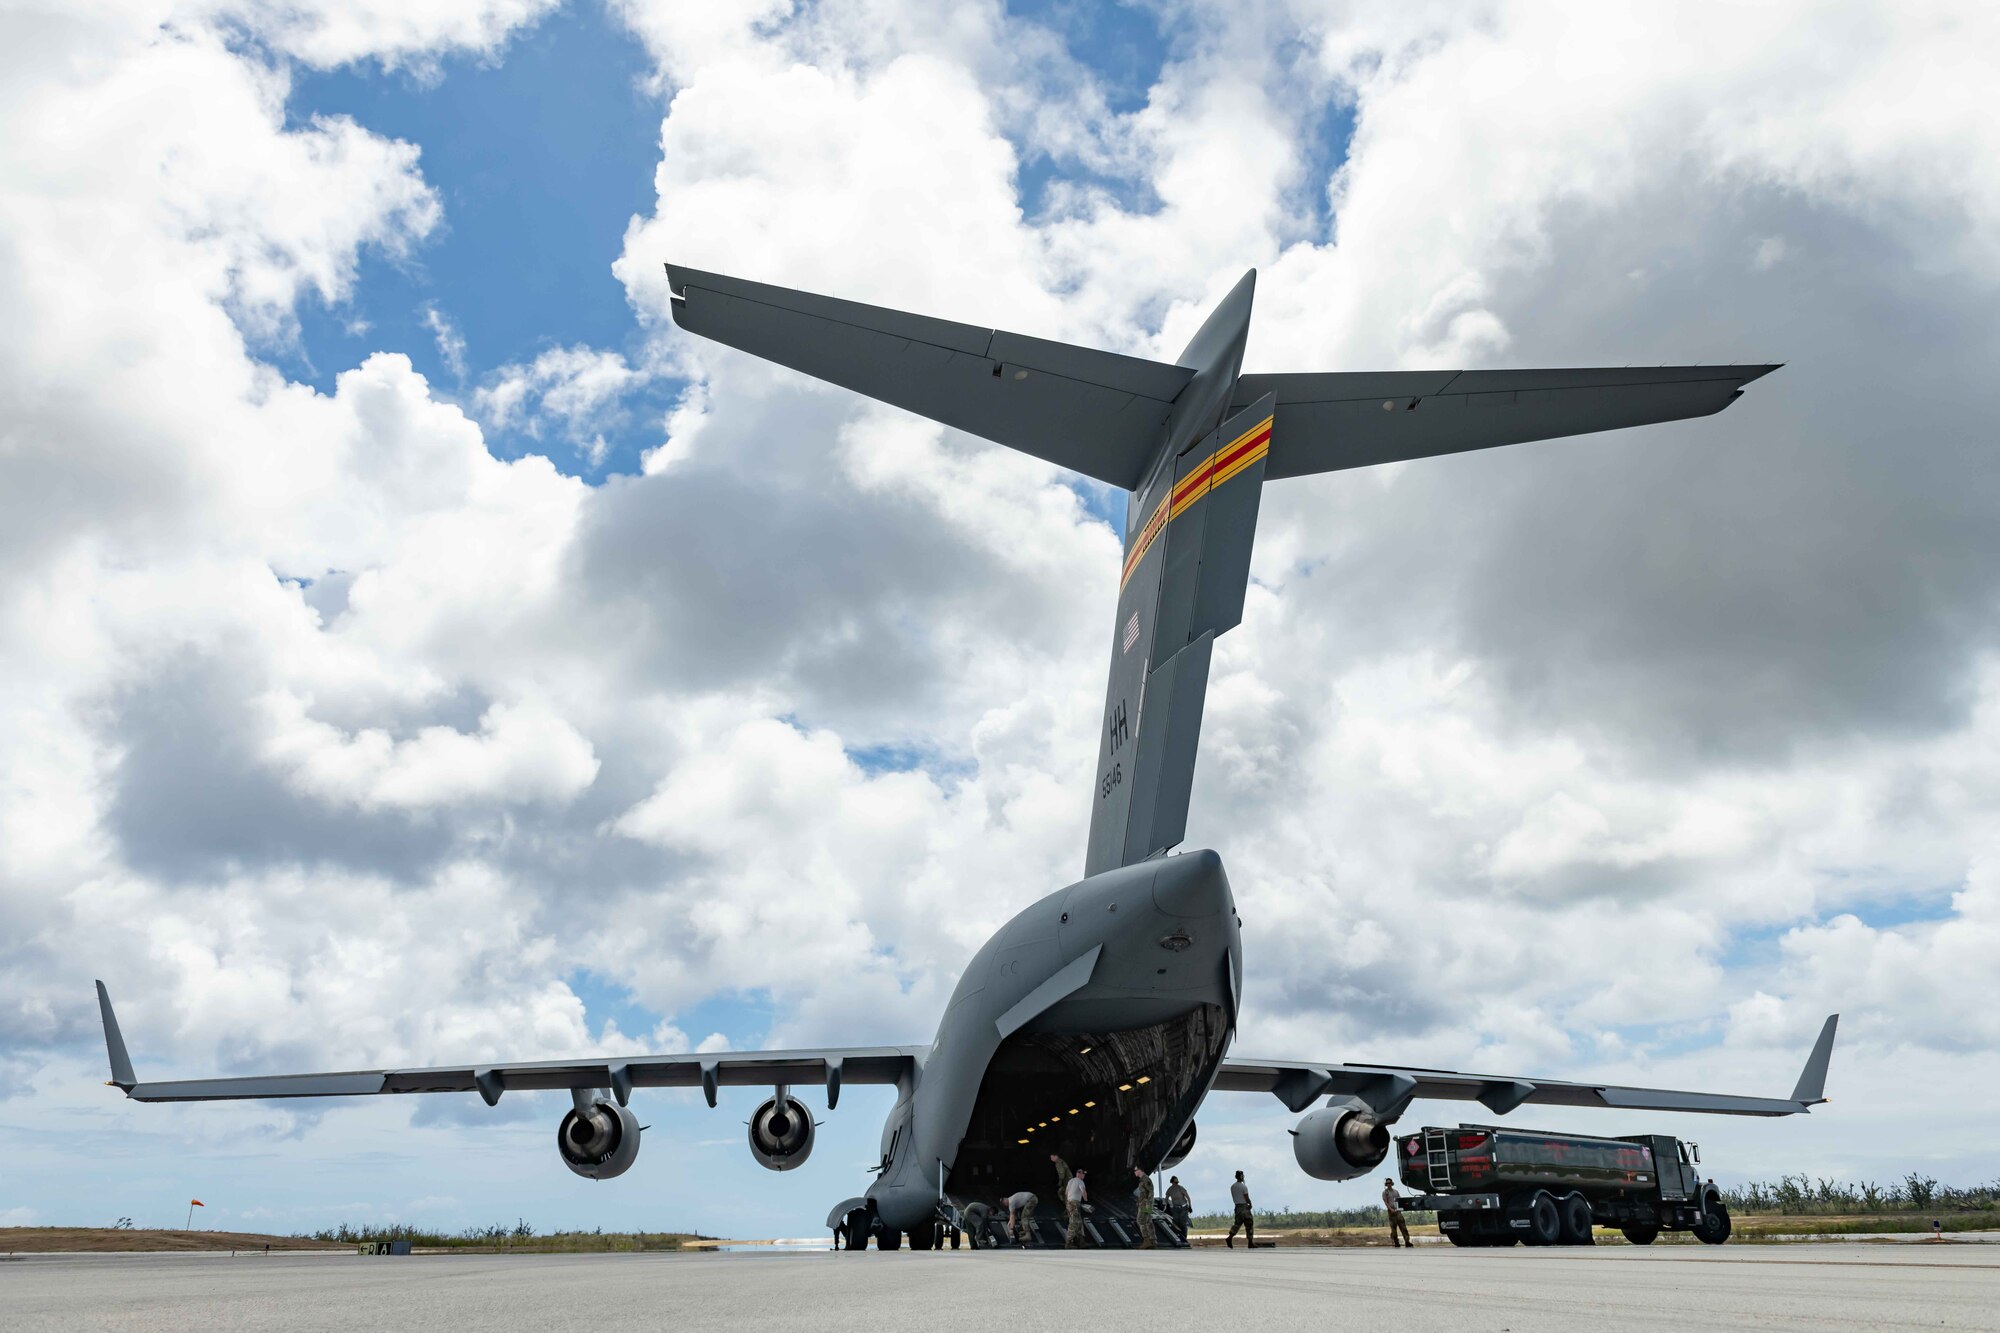 U.S. Air Force Airmen unload a fuel truck from a C-17 Globemaster at Tinian International Airport, Tinian, during exercise Resilient Typhoon, April 23, 2019. The exercise was designed to increase Pacific Air Forces’ ability to rapidly deploy and operate from airfields throughout the region.  (U.S. Air Force photo by Airman 1st Class Matthew Seefeldt)